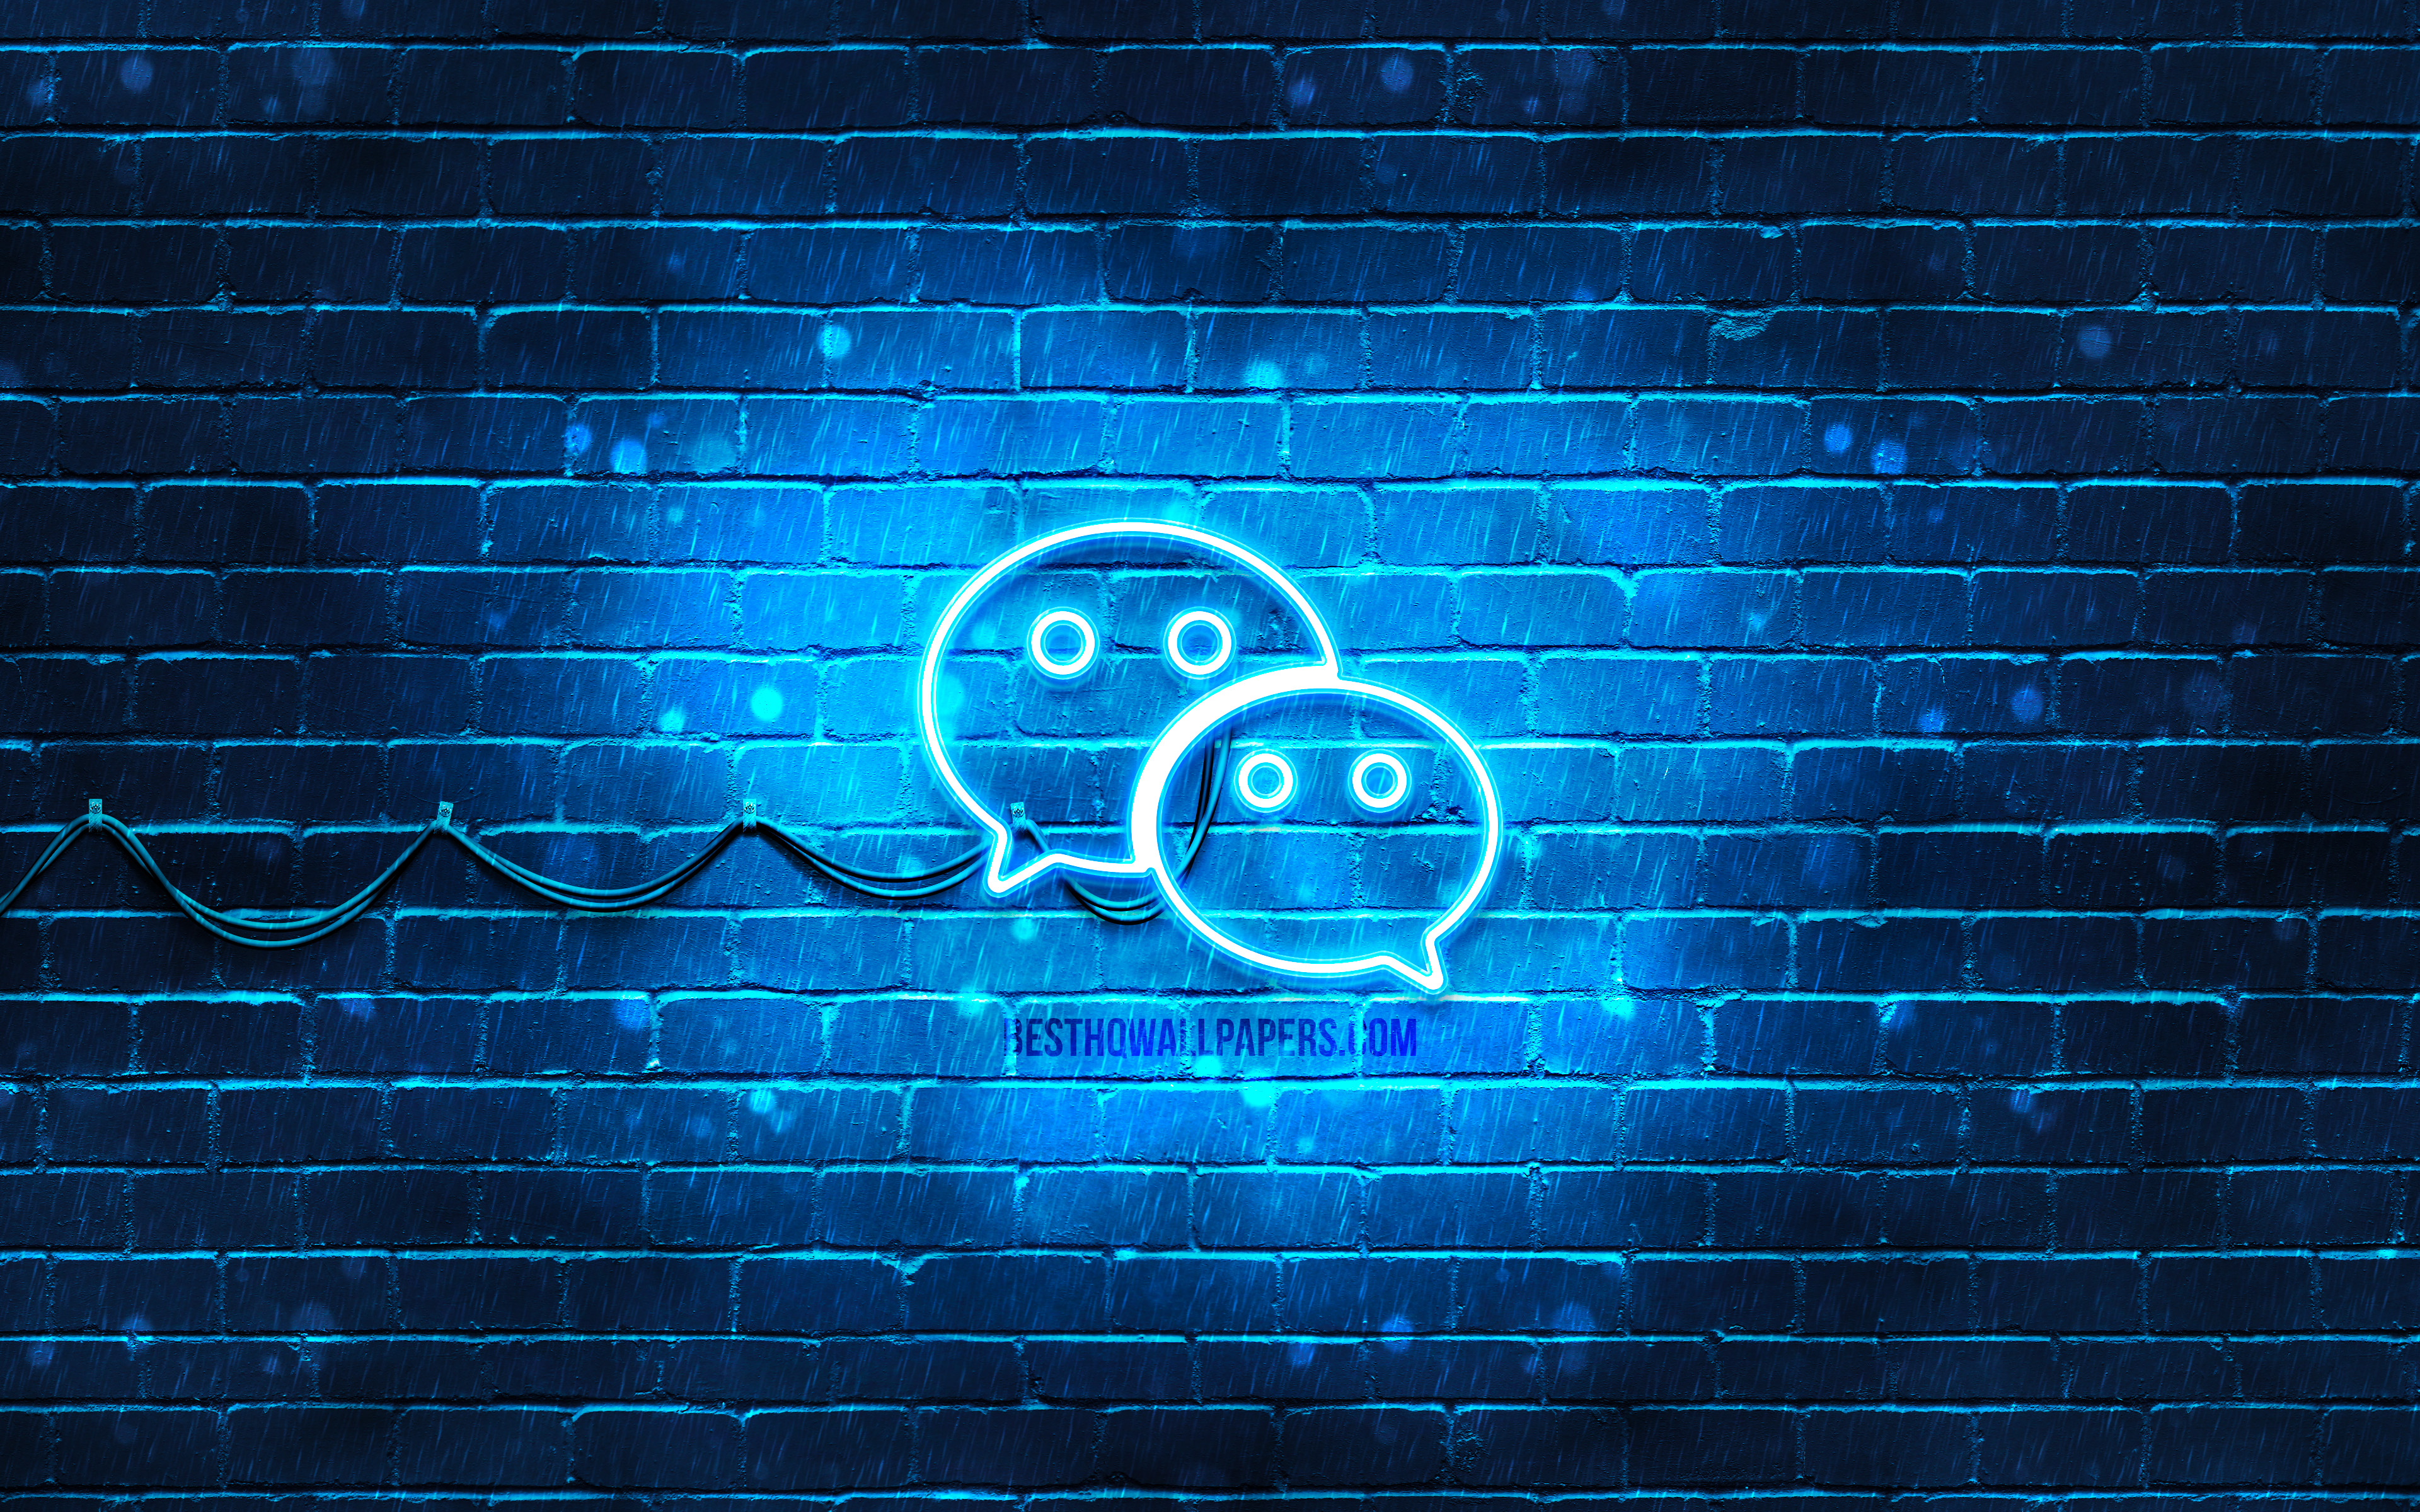 Download wallpaper WeChat blue logo, 4k, blue brickwall, WeChat logo, social networks, WeChat neon logo, WeChat for desktop with resolution 3840x2400. High Quality HD picture wallpaper